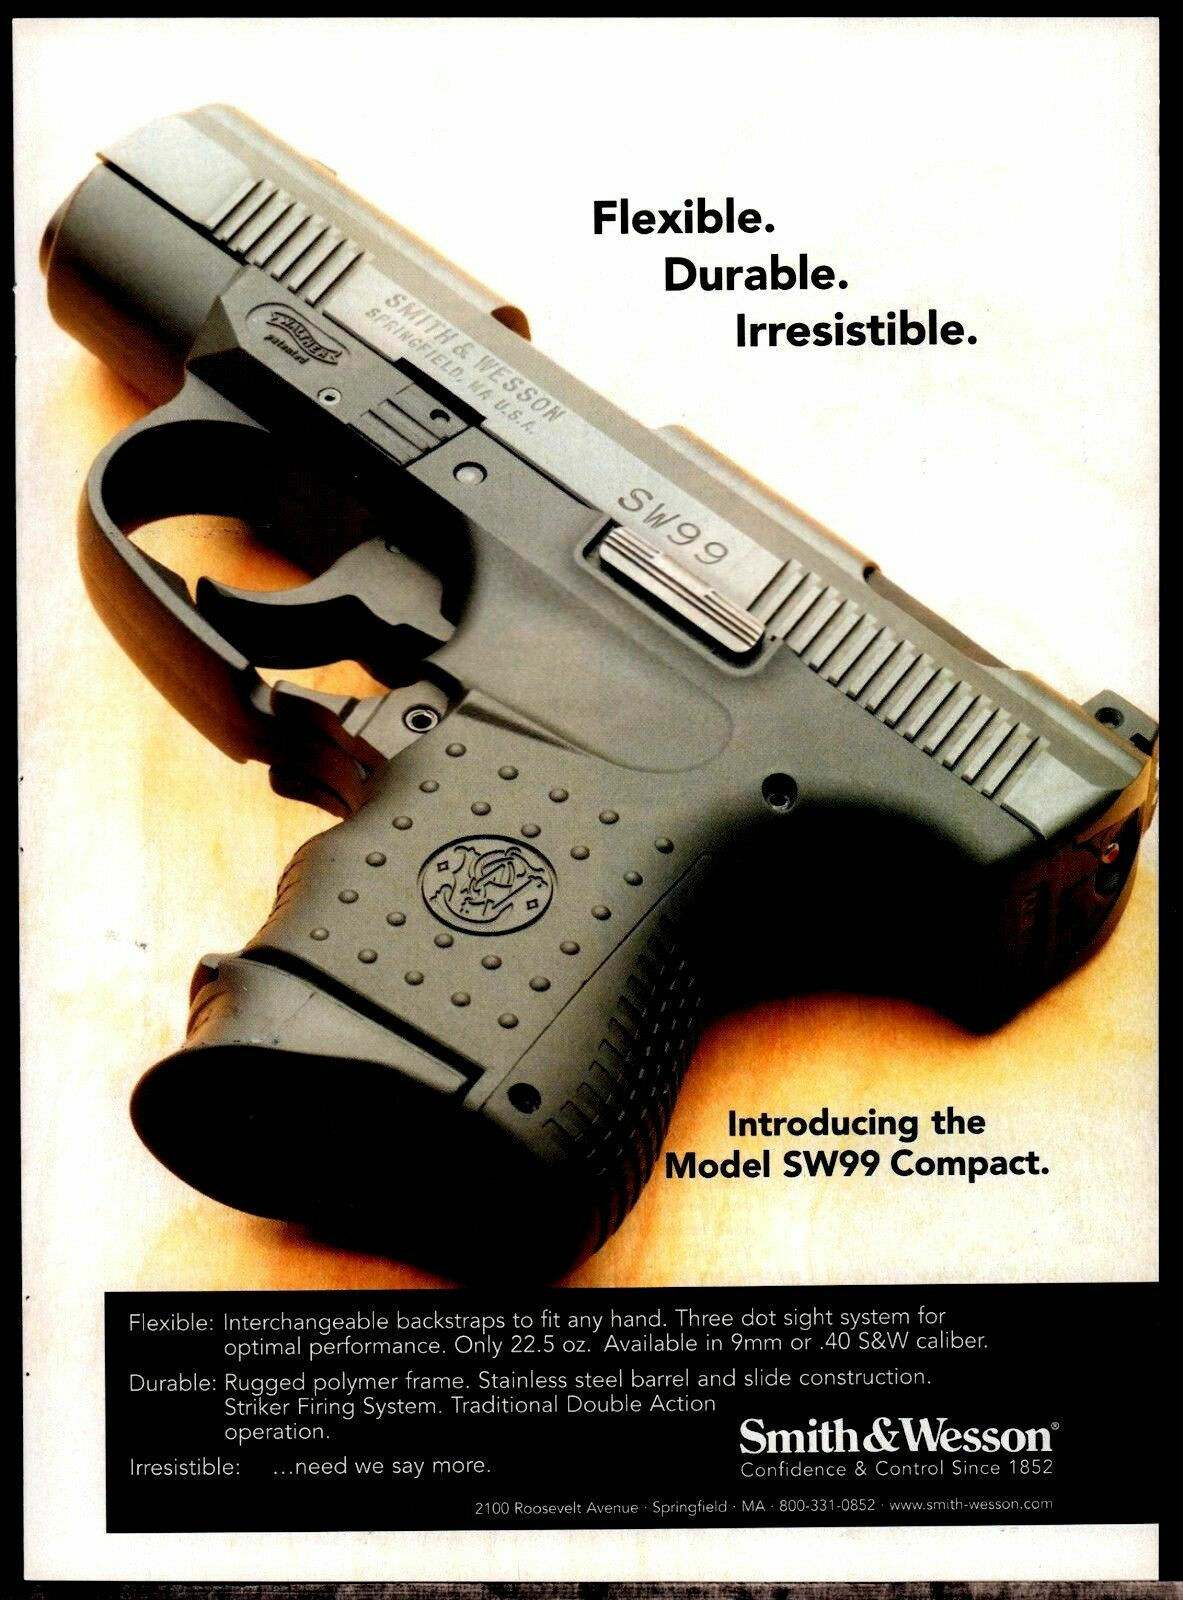 2003 SMITH & WESSON Model SW99 Compact Pistol AD COLLECTIBLE GUN ADVERTISEMENT